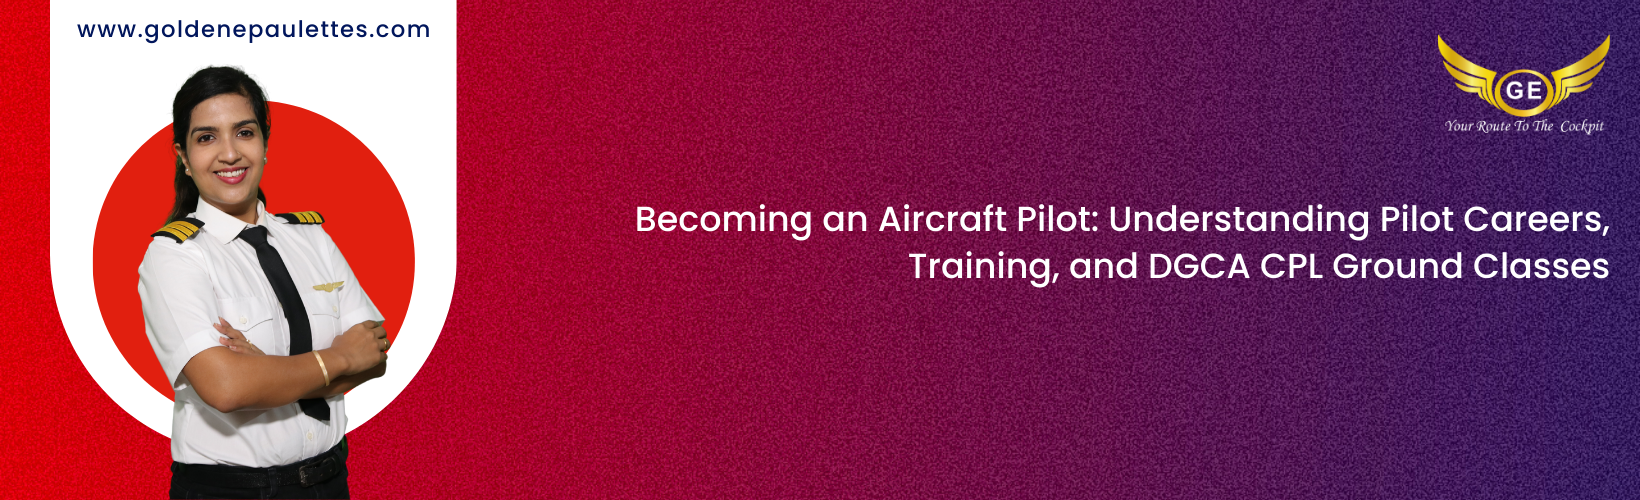 The Benefits of Pilot Training and the DGCA CPL Ground Classes